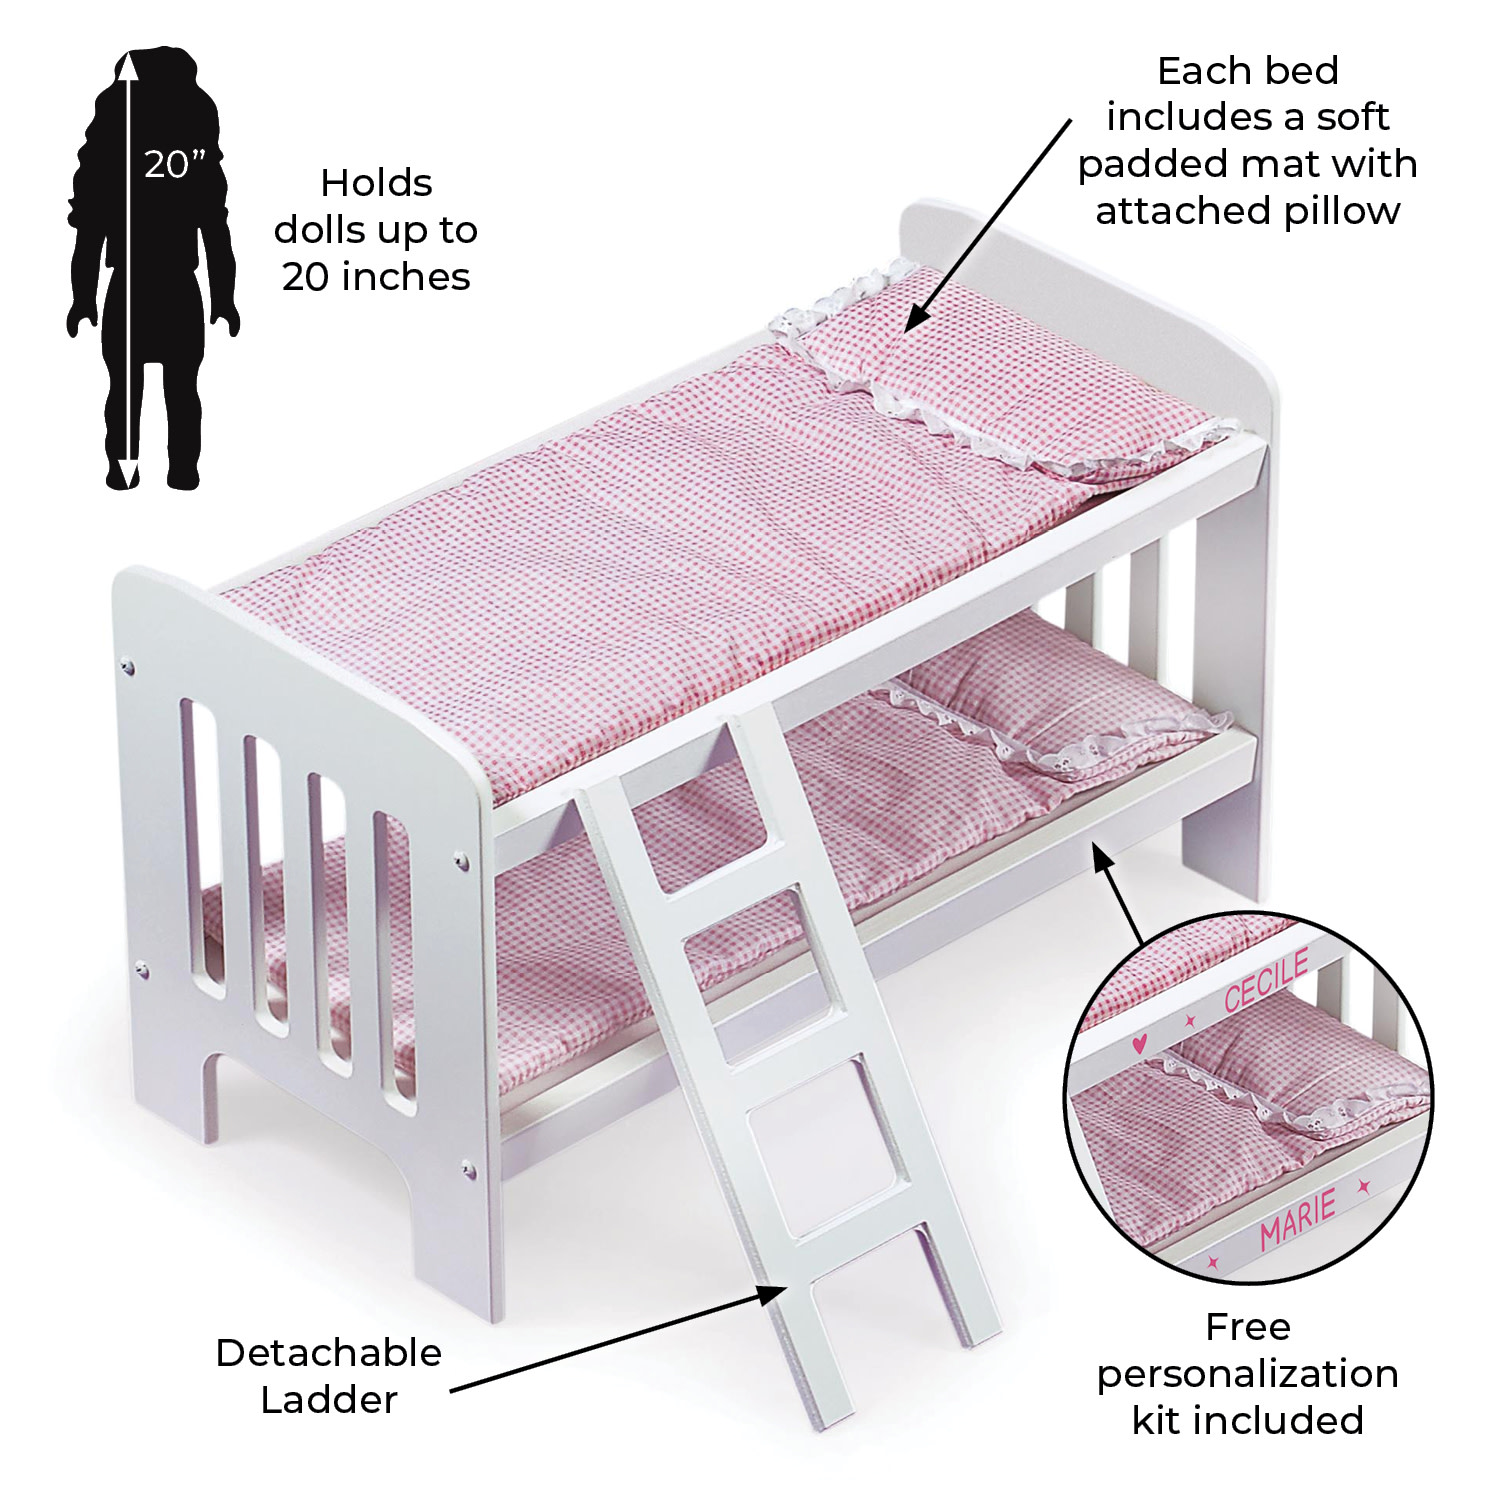 Badger Basket Doll Bunk Bed with Bedding, Ladder, and Free Personalization Kit - White/Pink/Gingham - image 3 of 11